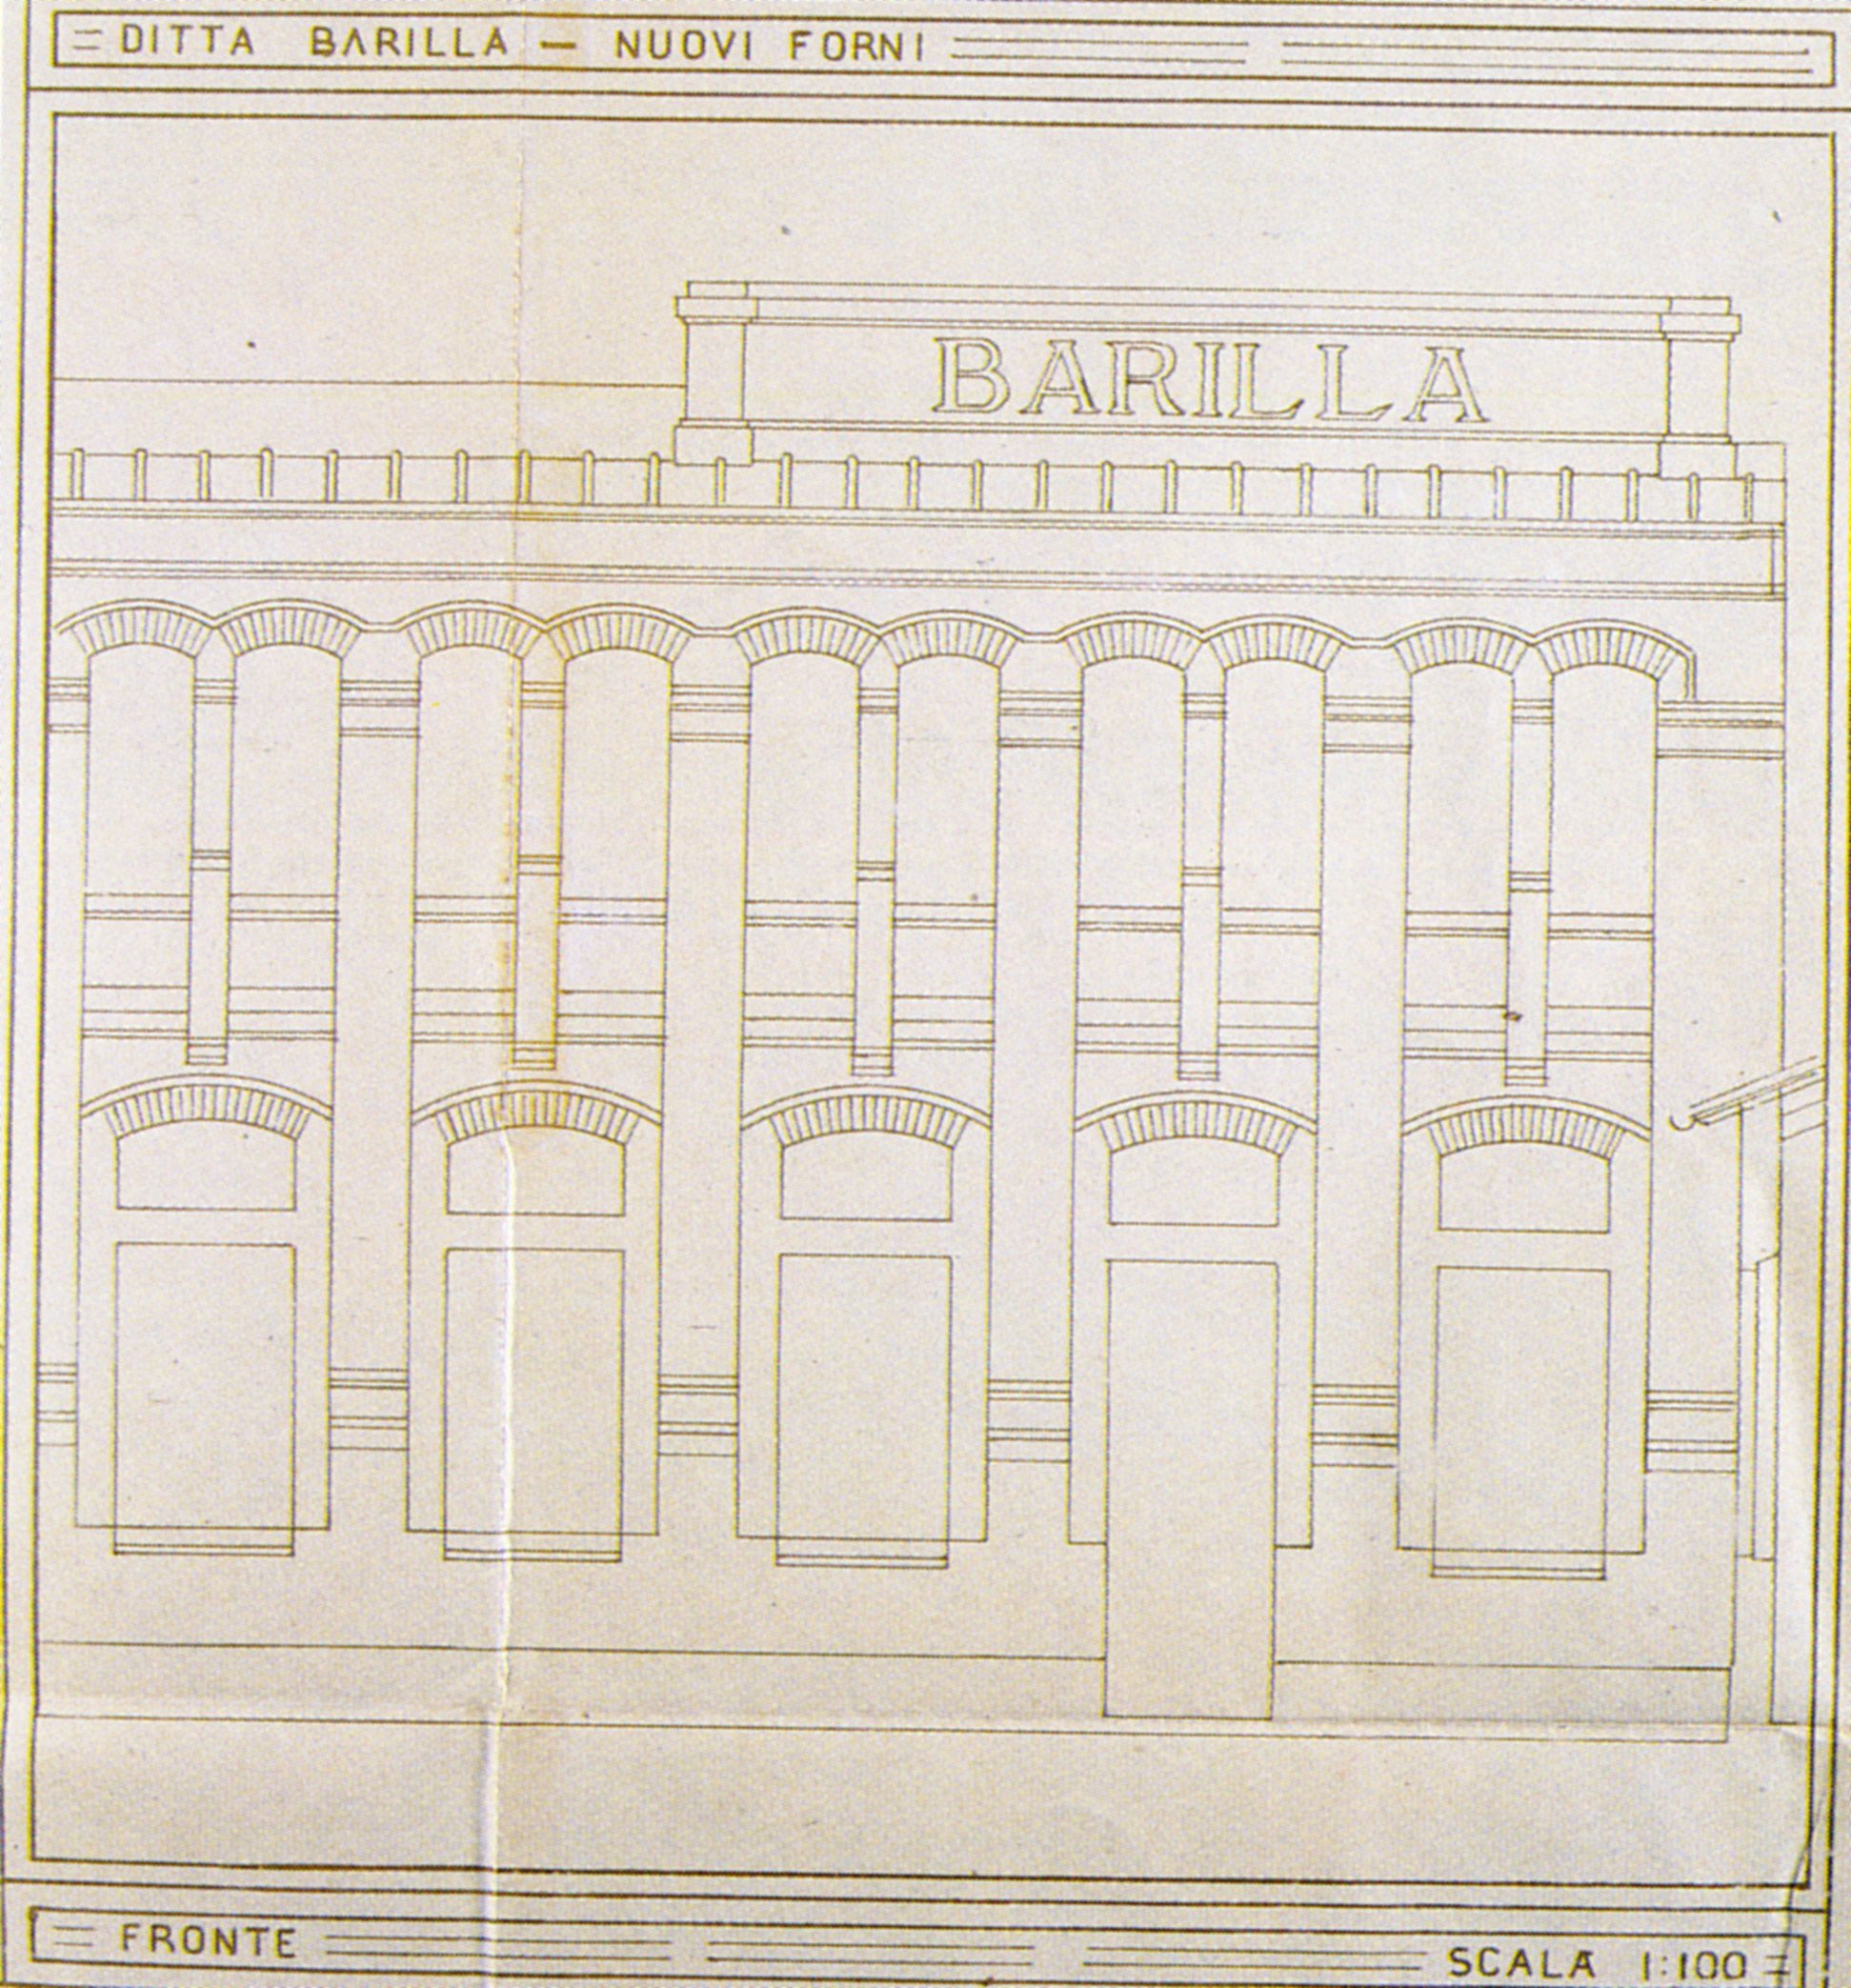 Camillo Uccelli, Design for the New Ovens, 1923: south perspective design [ASCPR, building licenses, 1922/293].